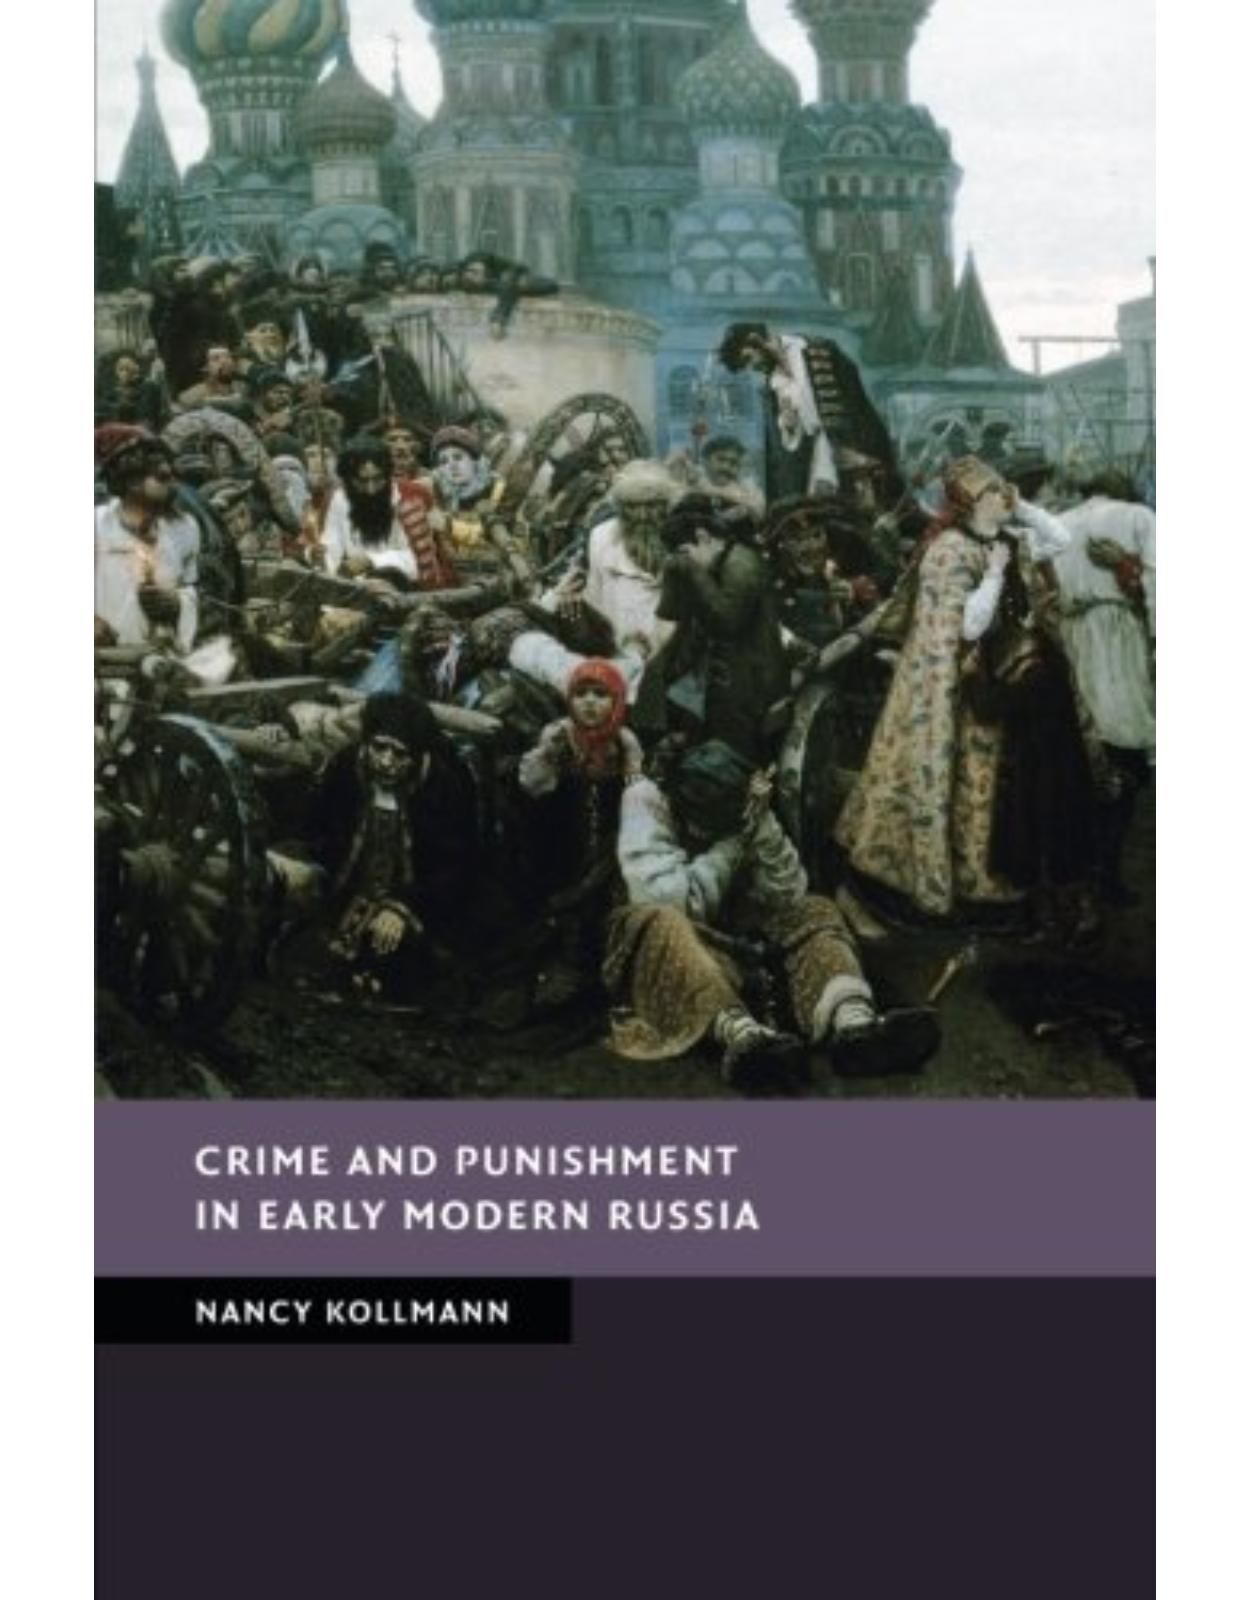 Crime and Punishment in Early Modern Russia (New Studies in European History) 